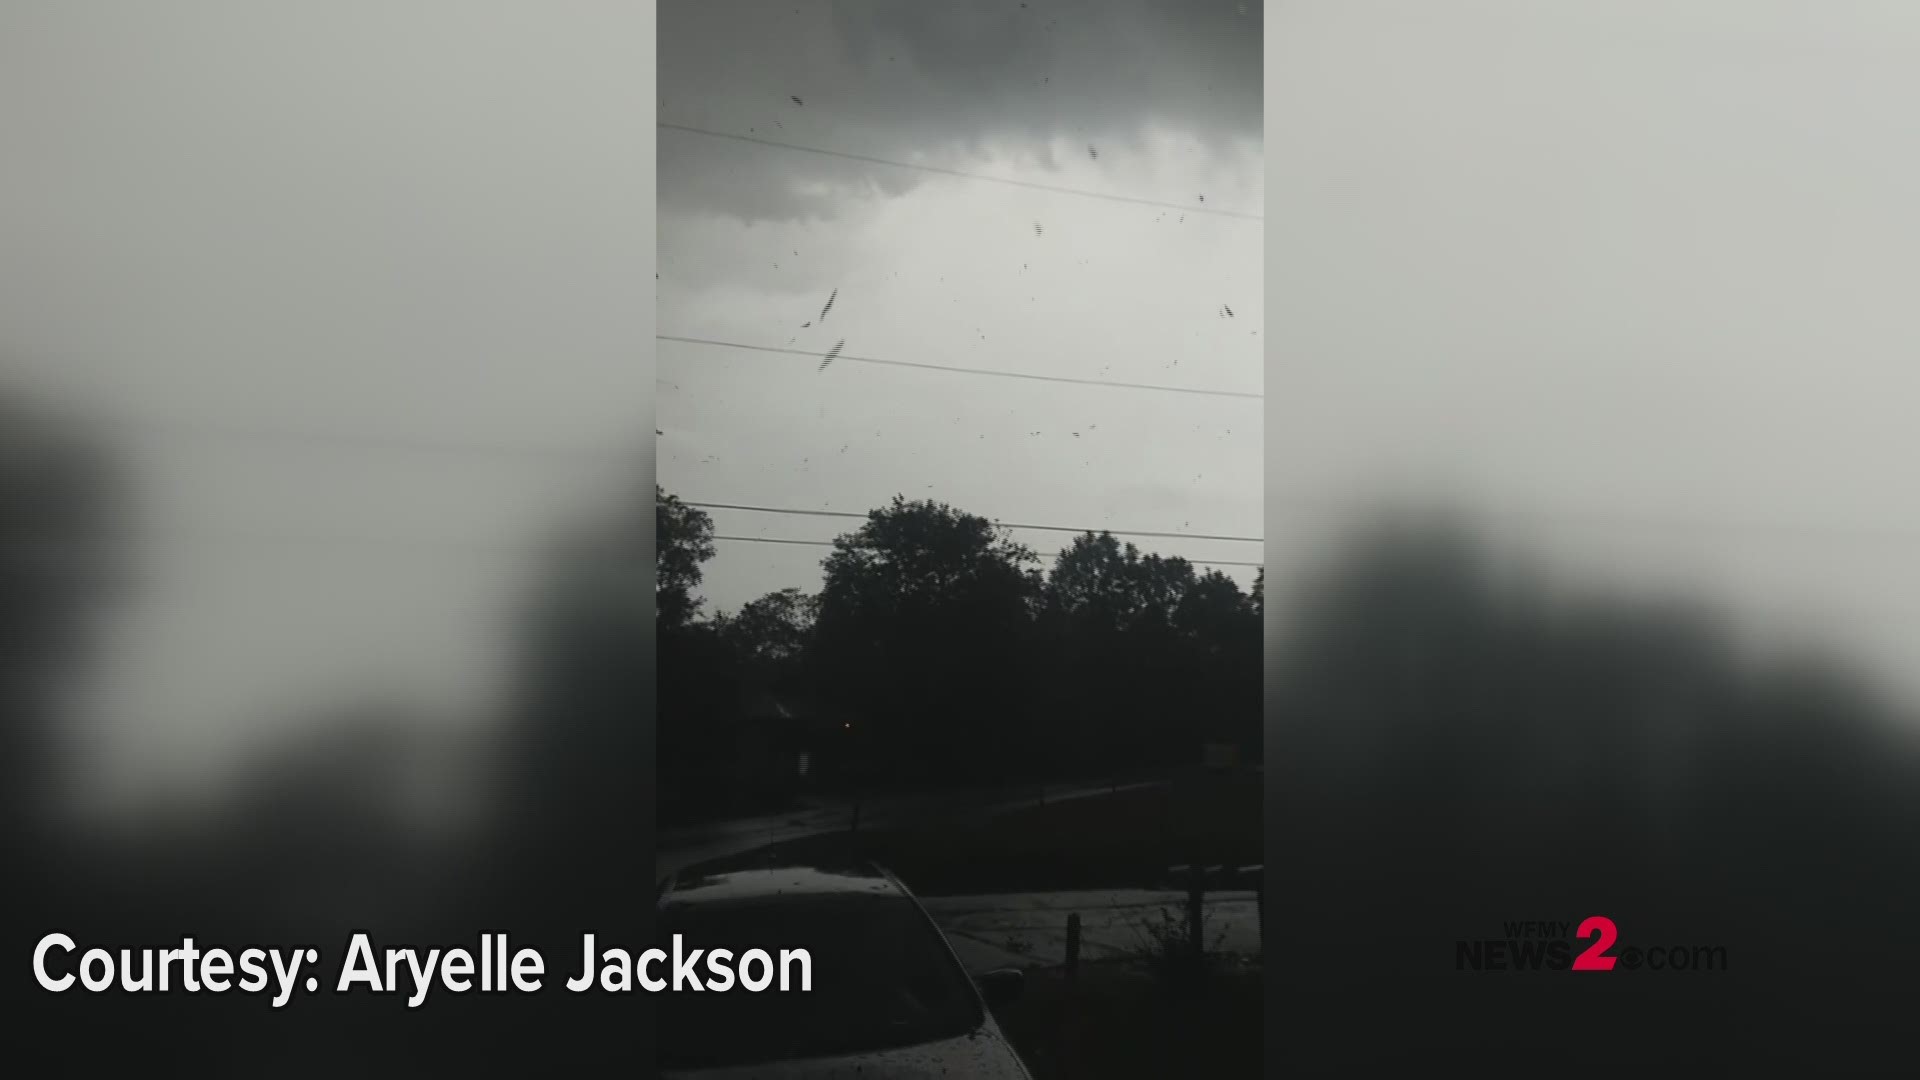 This video was sent in by Aryelle Jackson. It's 1/4 mile outside of Fort Valley in Peach County, Georgia. It shows debris floating down from the sky after a tornado warning